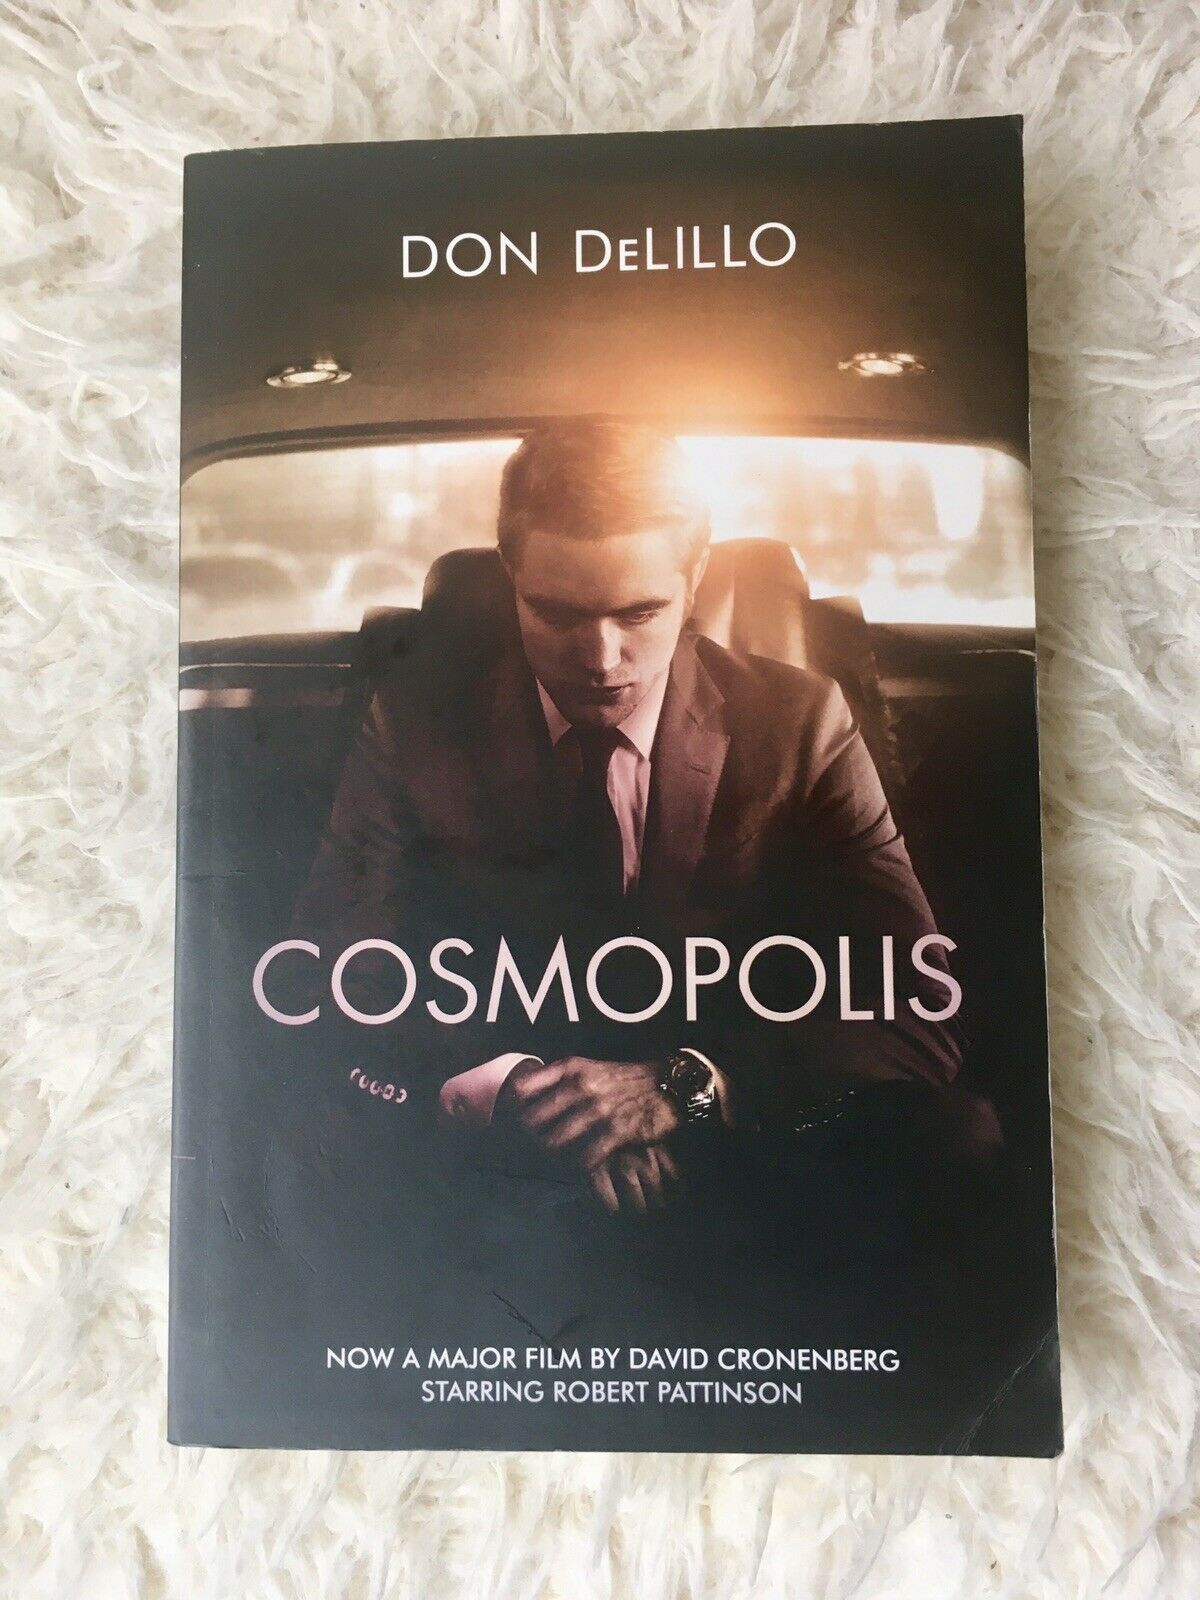 Front cover paperback: "cosmopolis by Don Delillo"